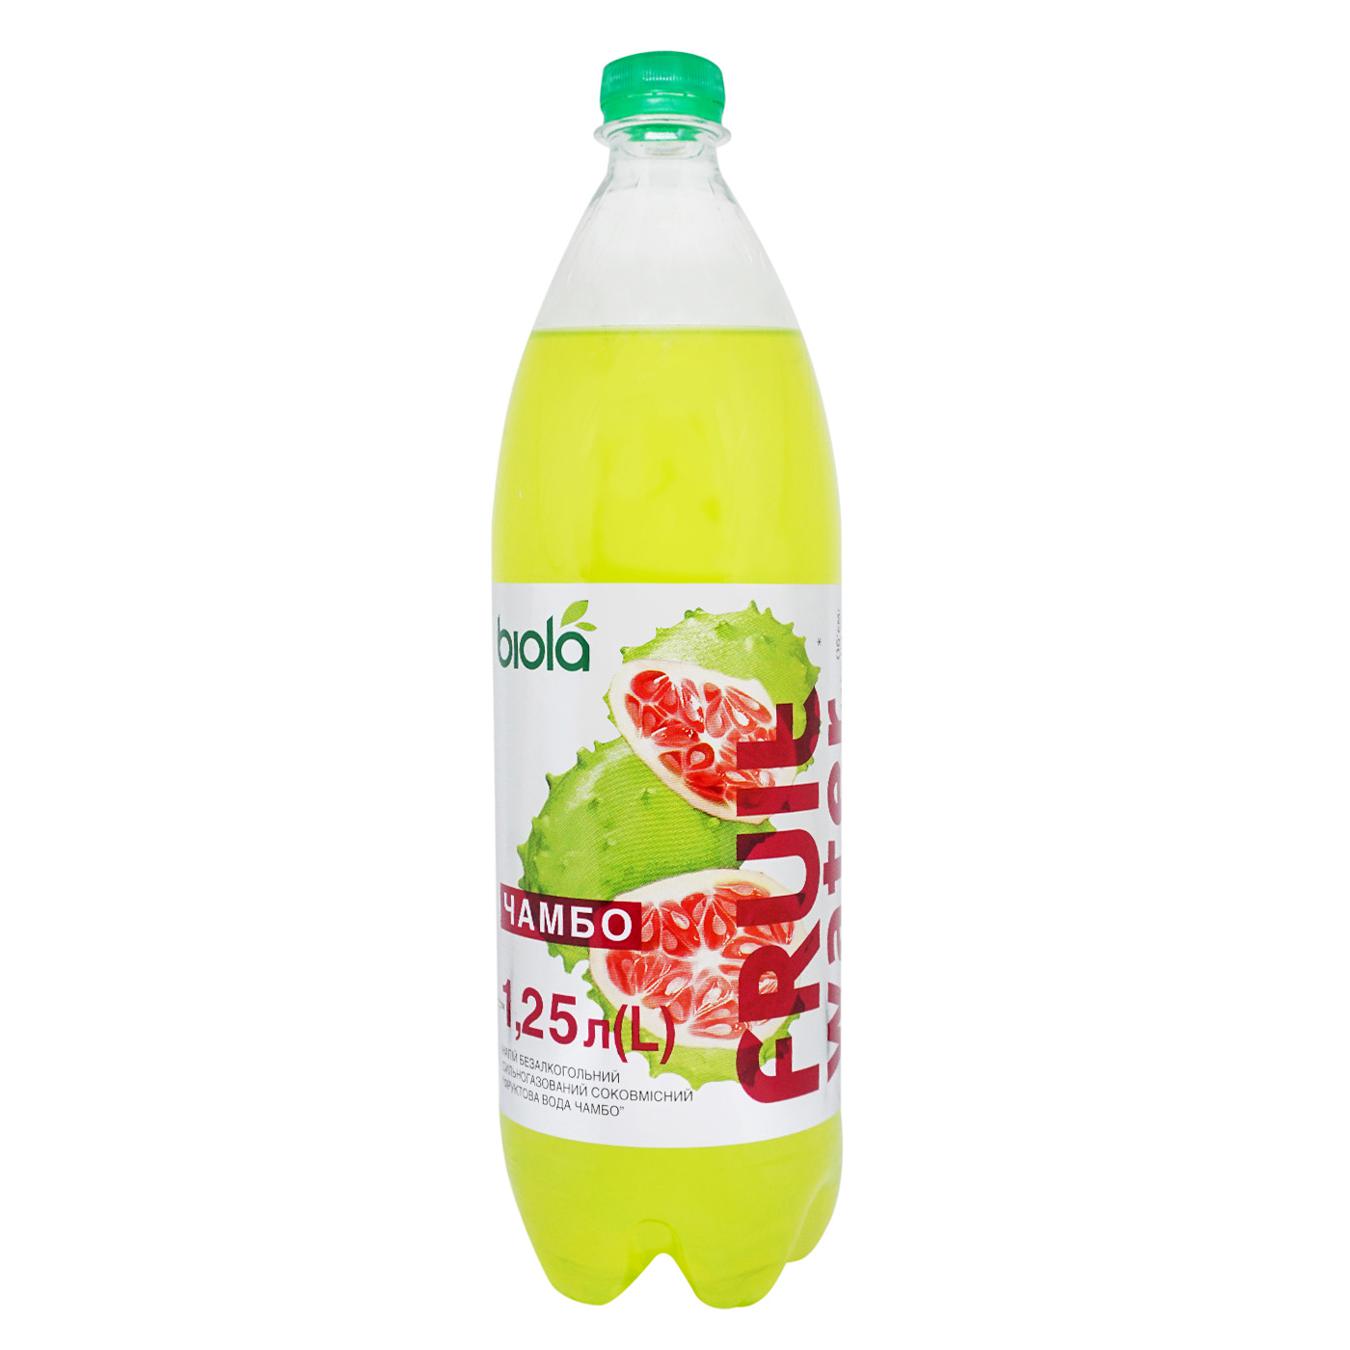 Carbonated drink Biola Fruit water Chambo 1.25 l